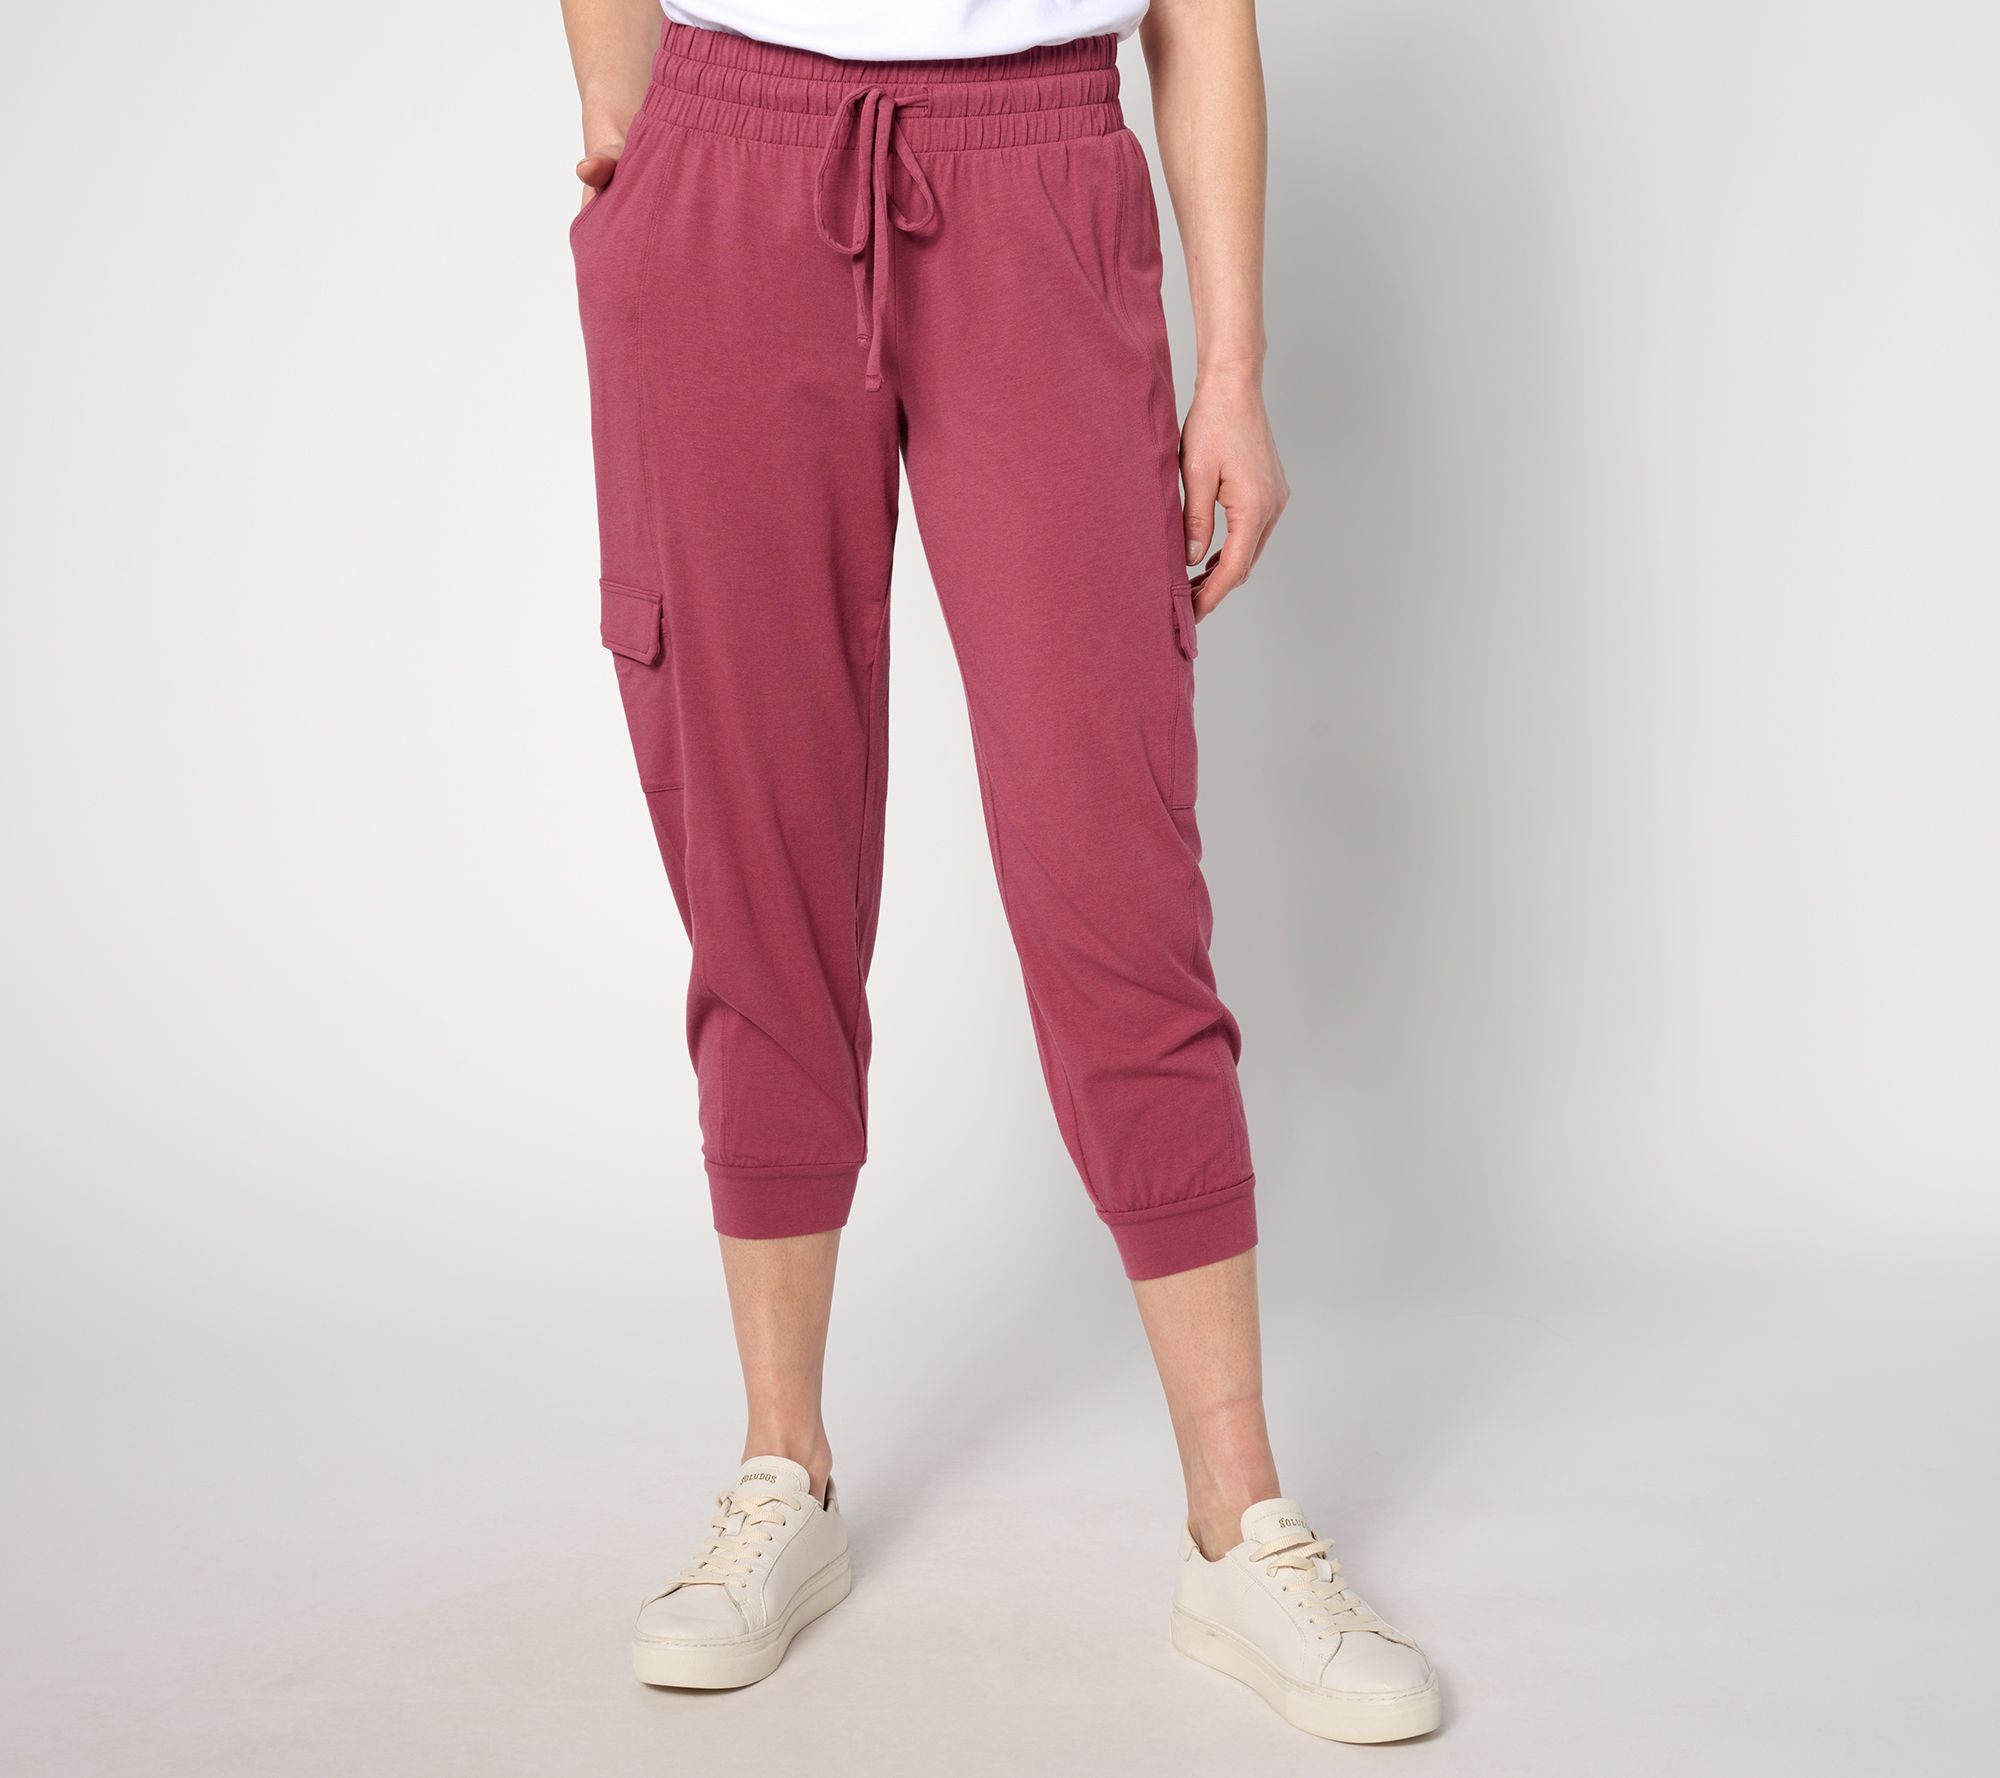 Free People Movement women's Back Into It cozy knit jogger